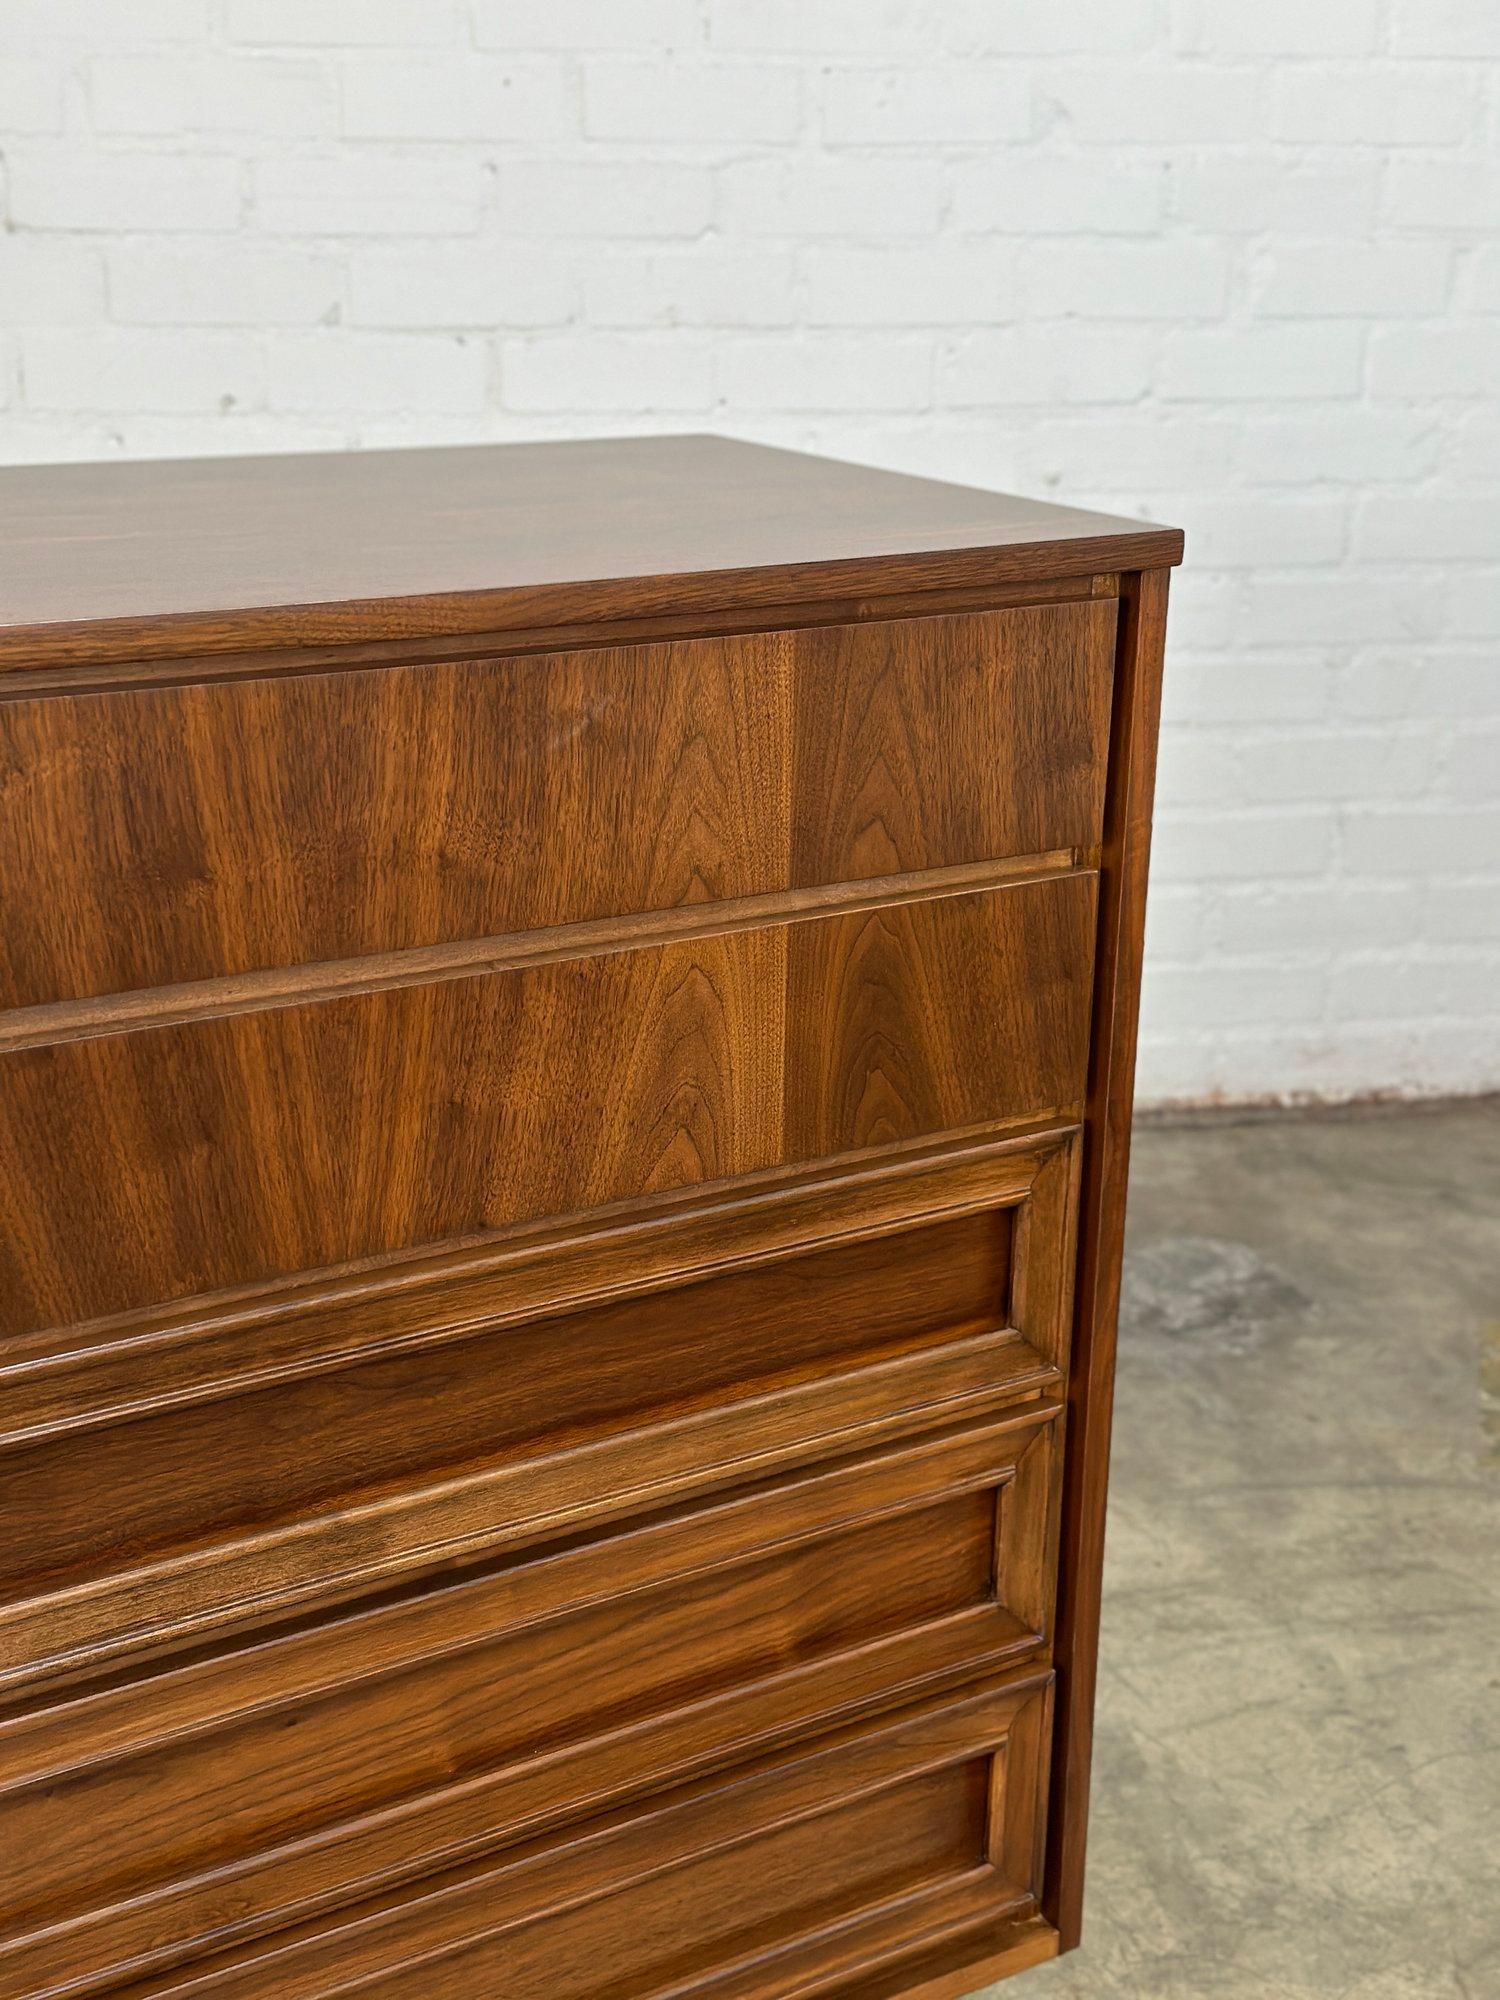 W40 D19 H42.5

Fully restored highboy dresser in walnut. Item features hidden pulls on the top drawers and encased bottom drawers. Highboy is structurally sound and sturdy with no major areas of wear. 